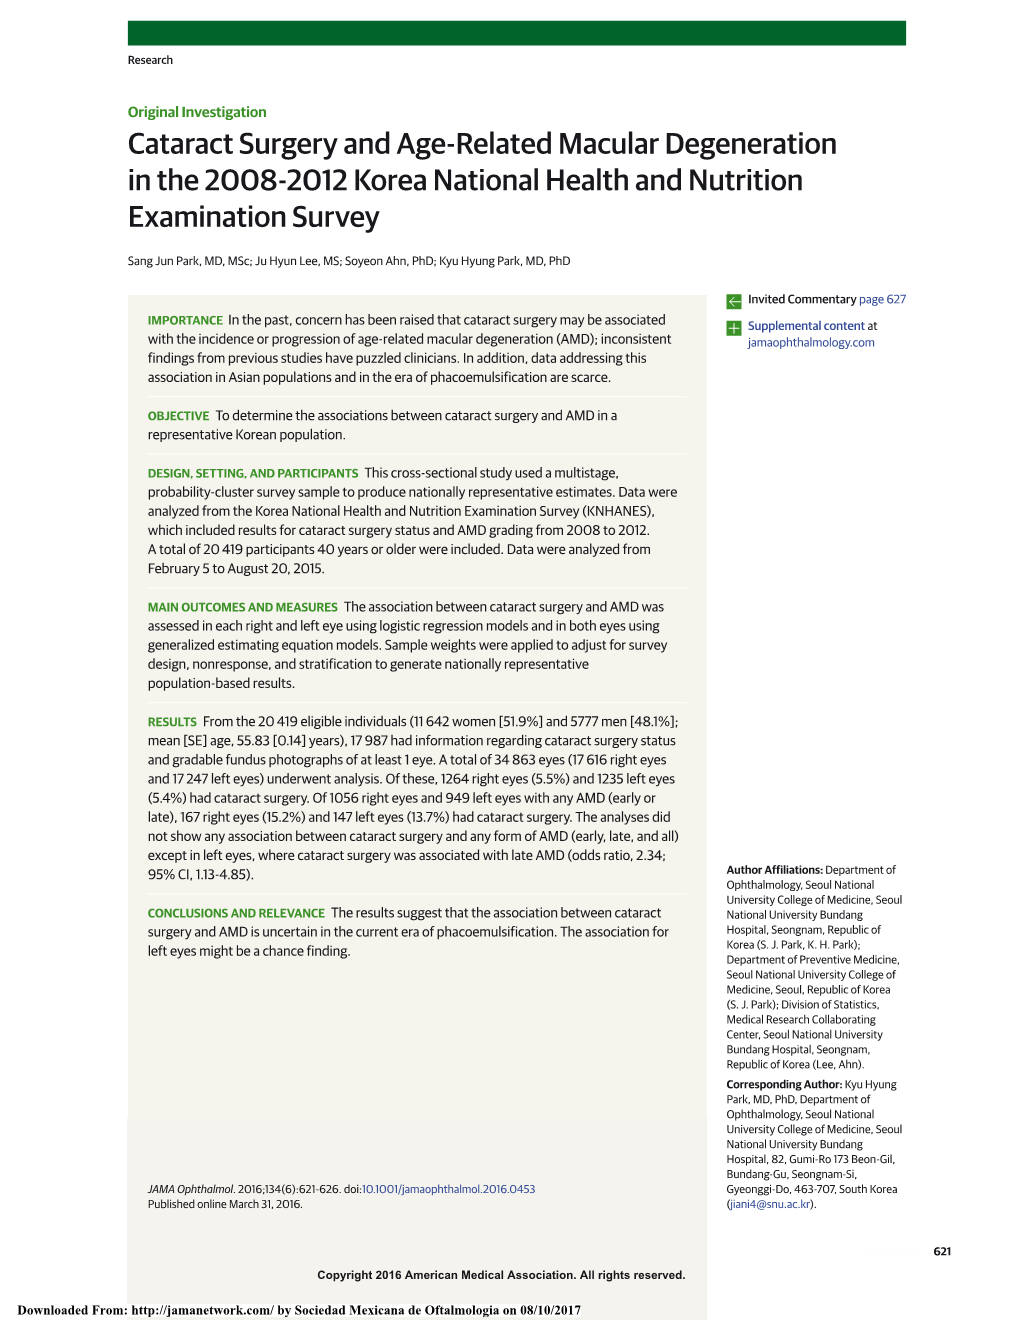 Cataract Surgery and Age-Related Macular Degeneration in the 2008-2012 Korea National Health and Nutrition Examination Survey